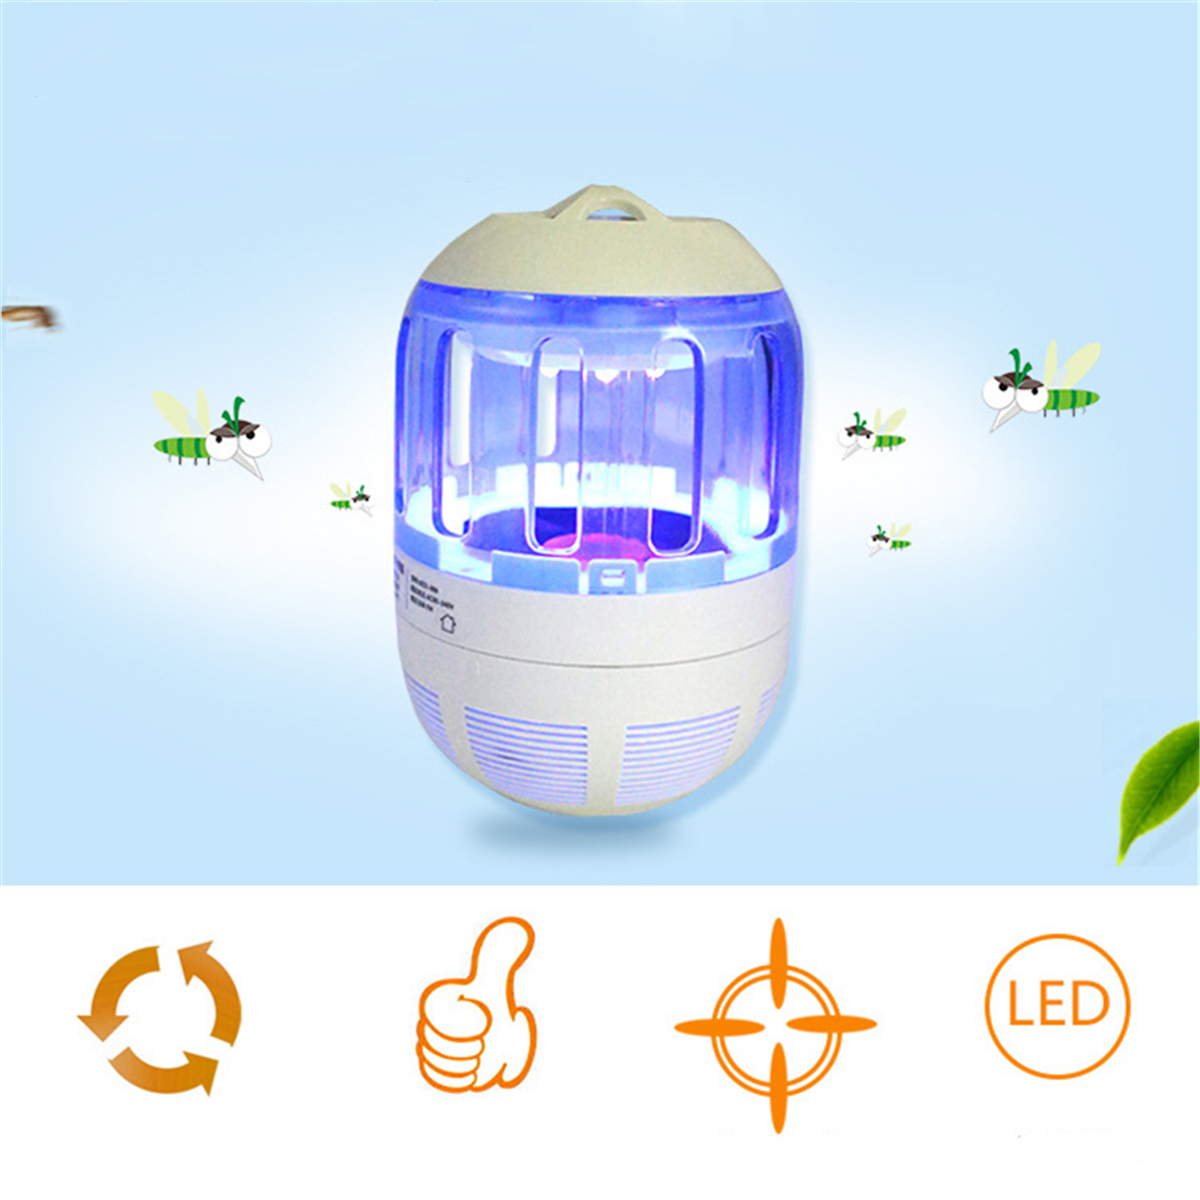 USB-Mosquito-Dispeller-LED-Mosquito-Trap-Fly-Insect-Killer-UV-Light-Lamp-Mosquito-Killer-with-360-De-1484265-5